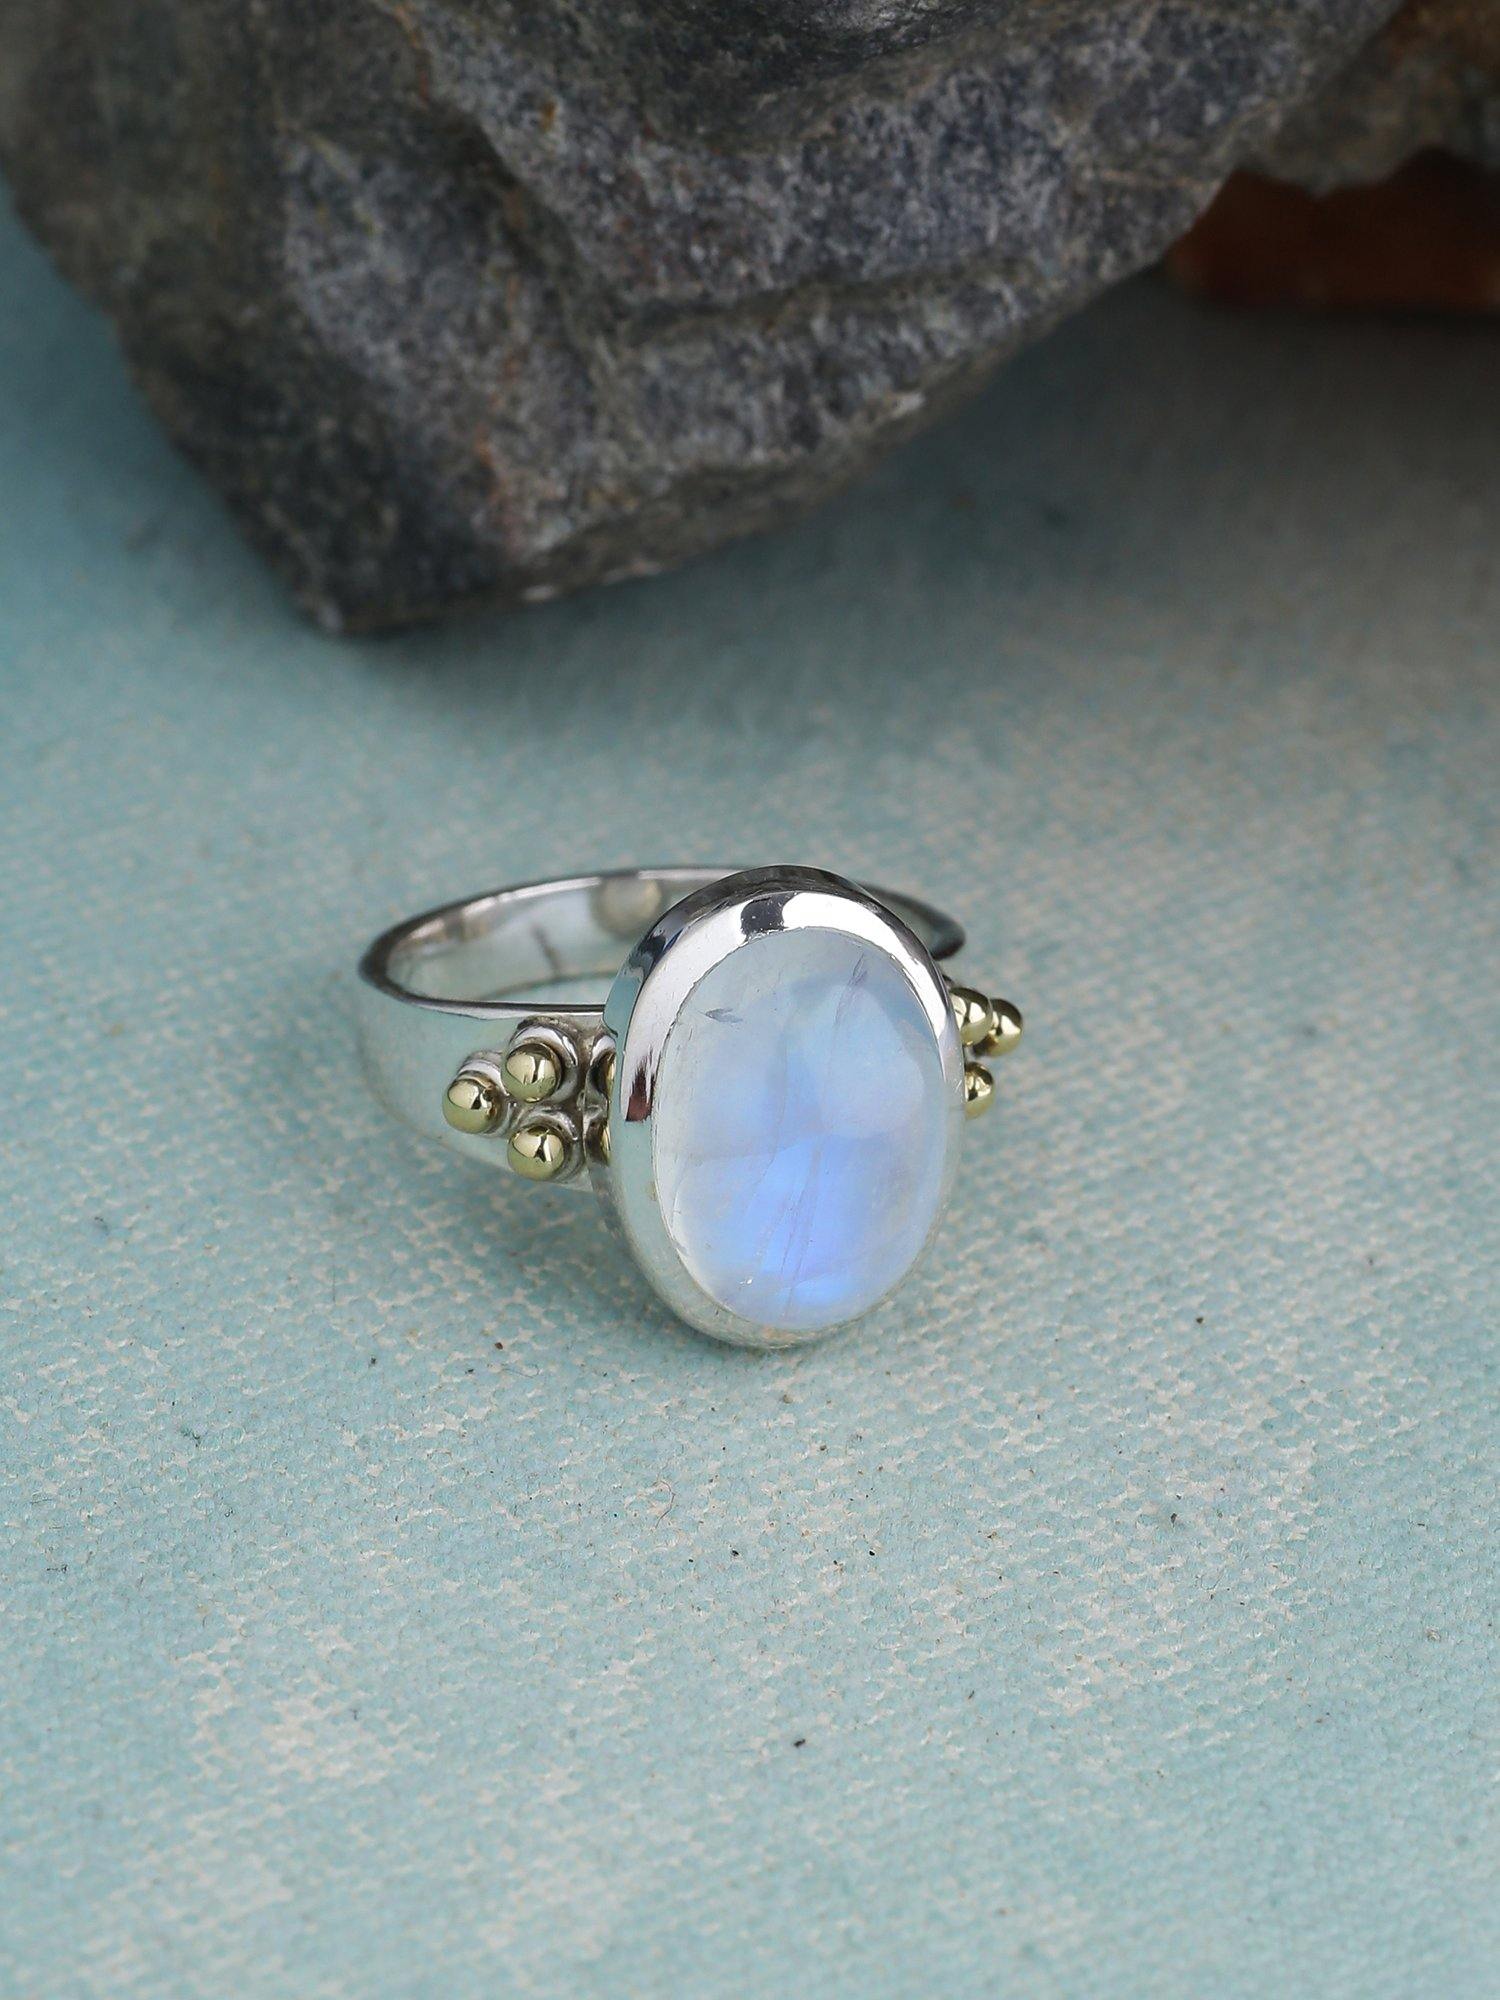 10x12 MM Moonstone Solitaire Ring 925 Sterling Silver With Brass Accents - YoTreasure